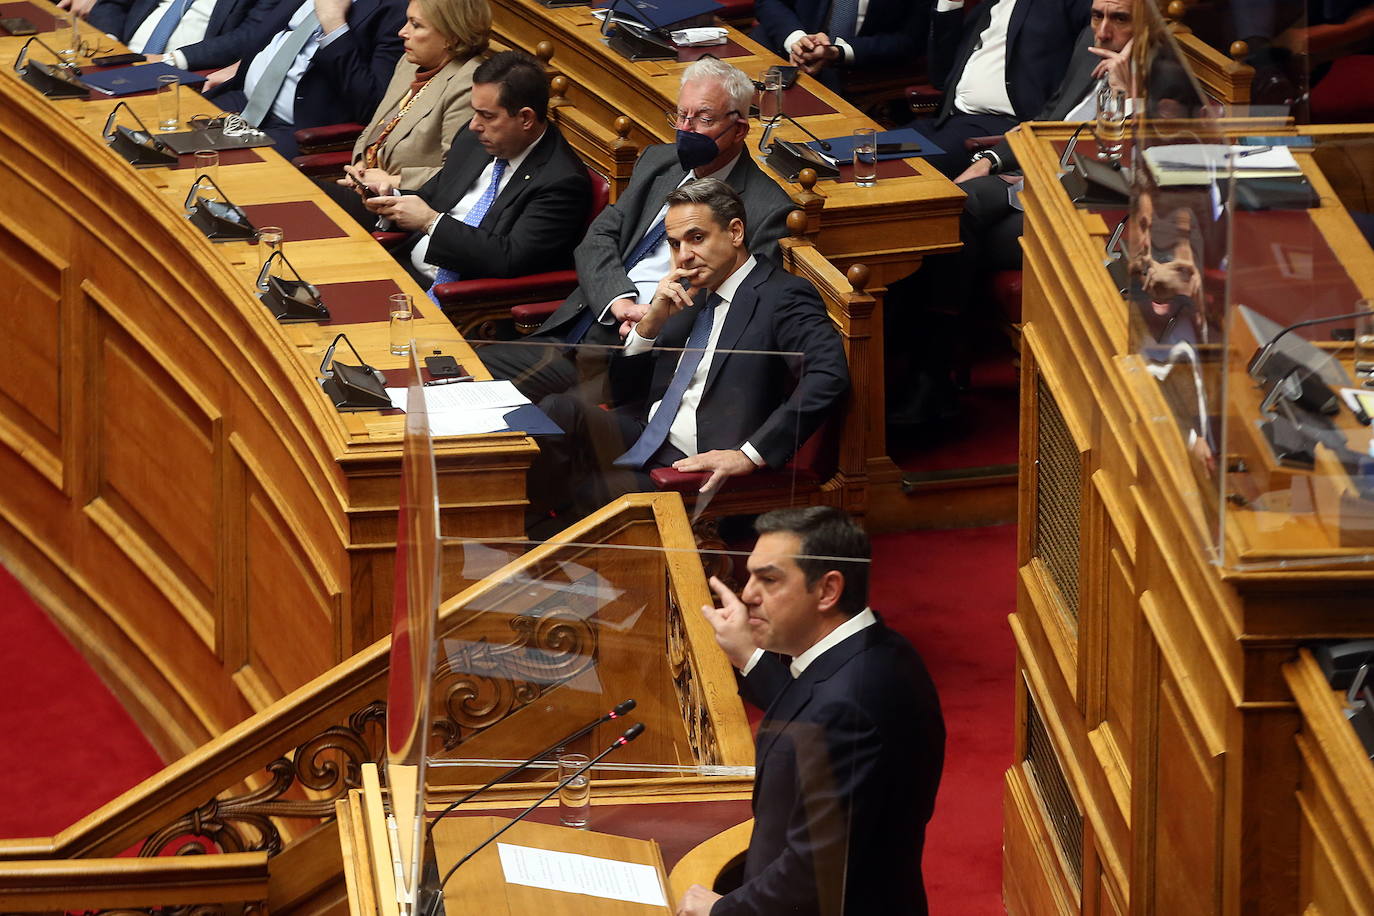 Greek Prime Minister Mitsotakis listens to opposition leader Alexis Tsipras's speech in Parliament